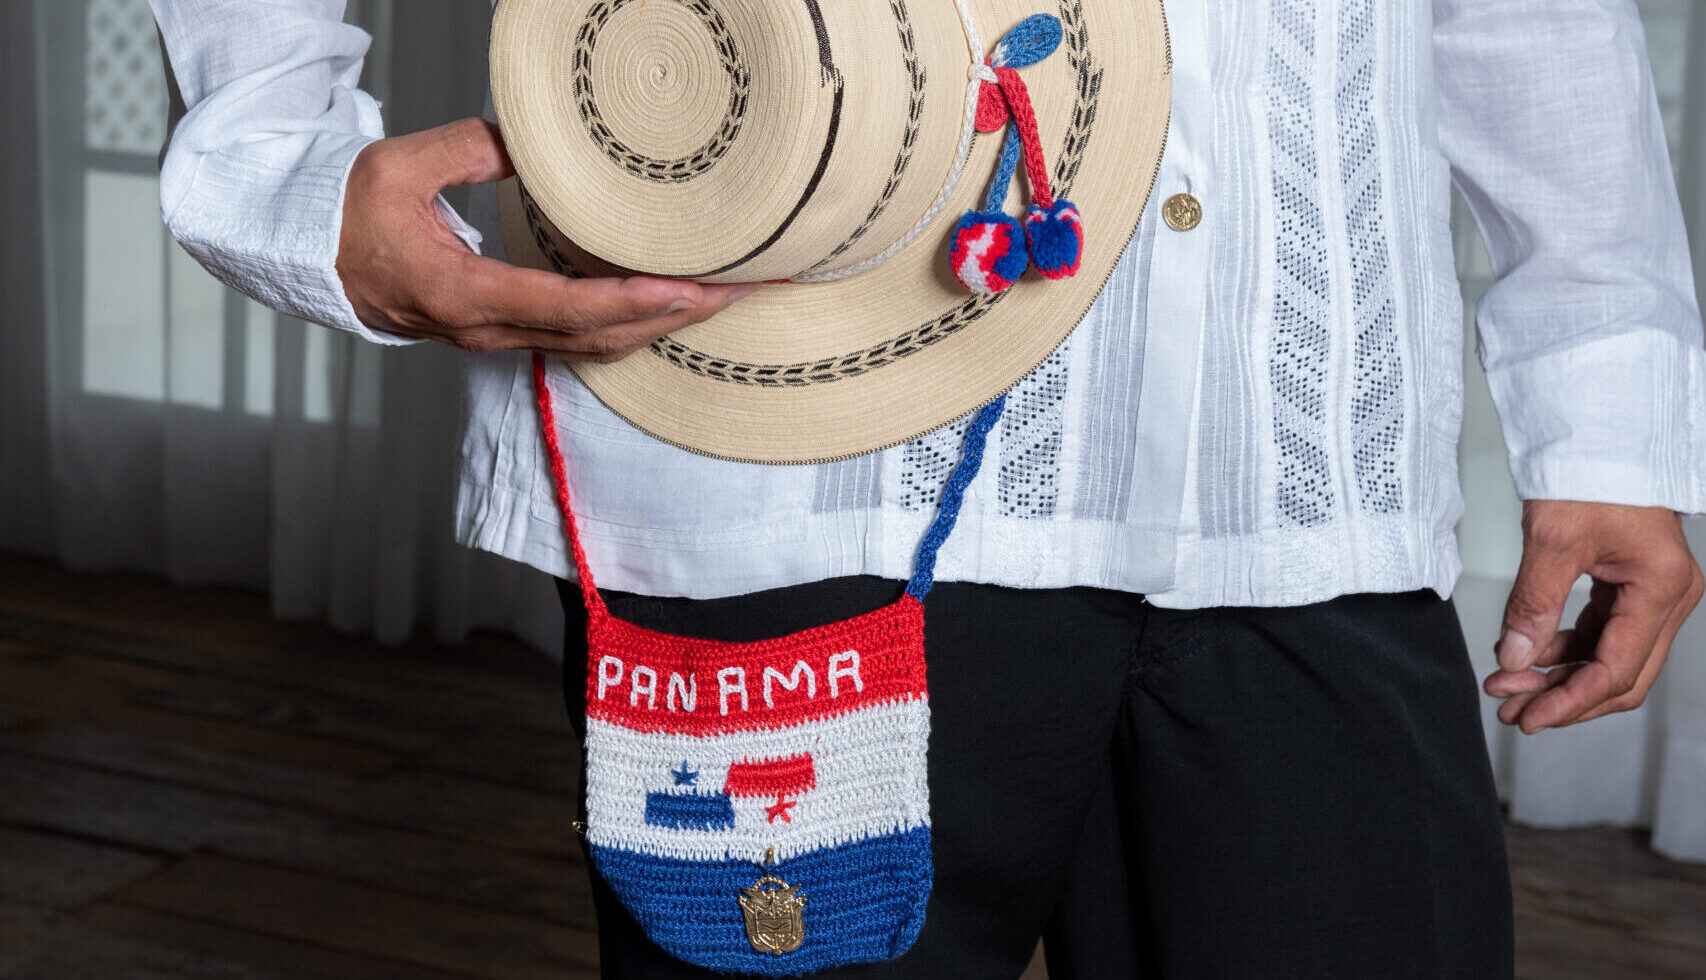 A man holds a straw hat held to his side. The hat has embroidery details in blue and red. He also wears a small emboridered purse that says the word 